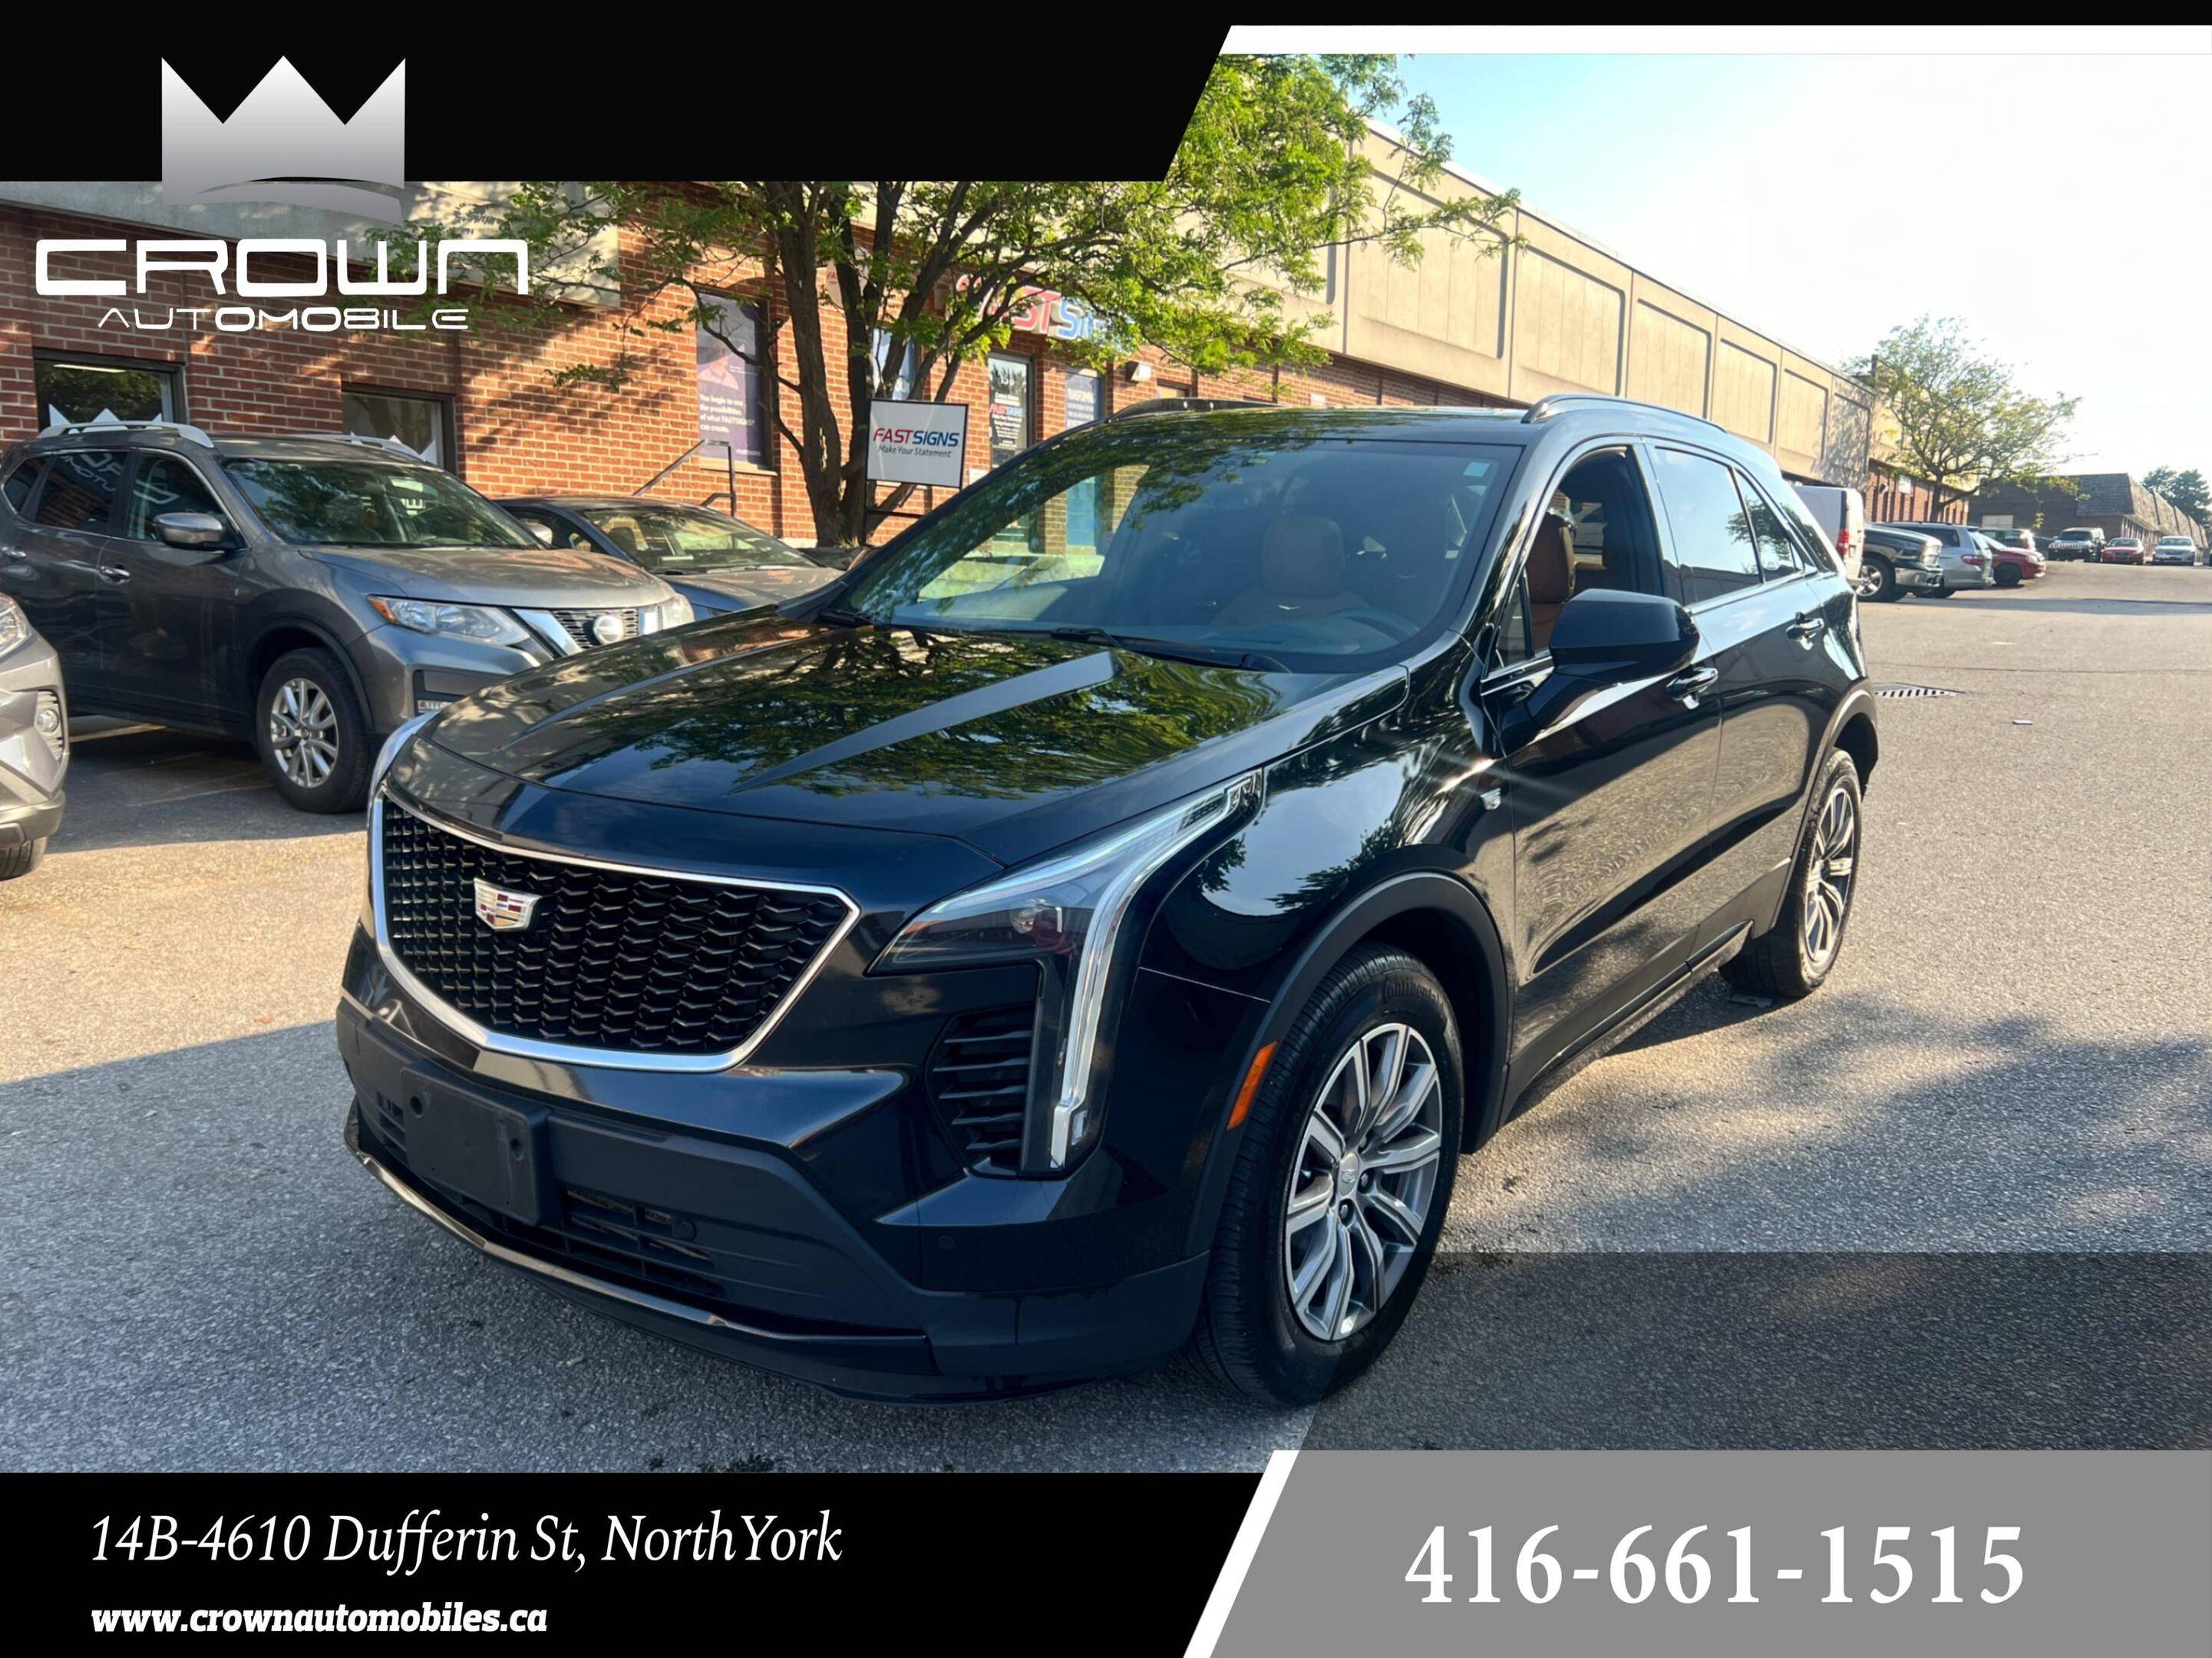 2019 Cadillac XT4 AWD 4dr Sport, ONE OWNER, NO ACCIDENT